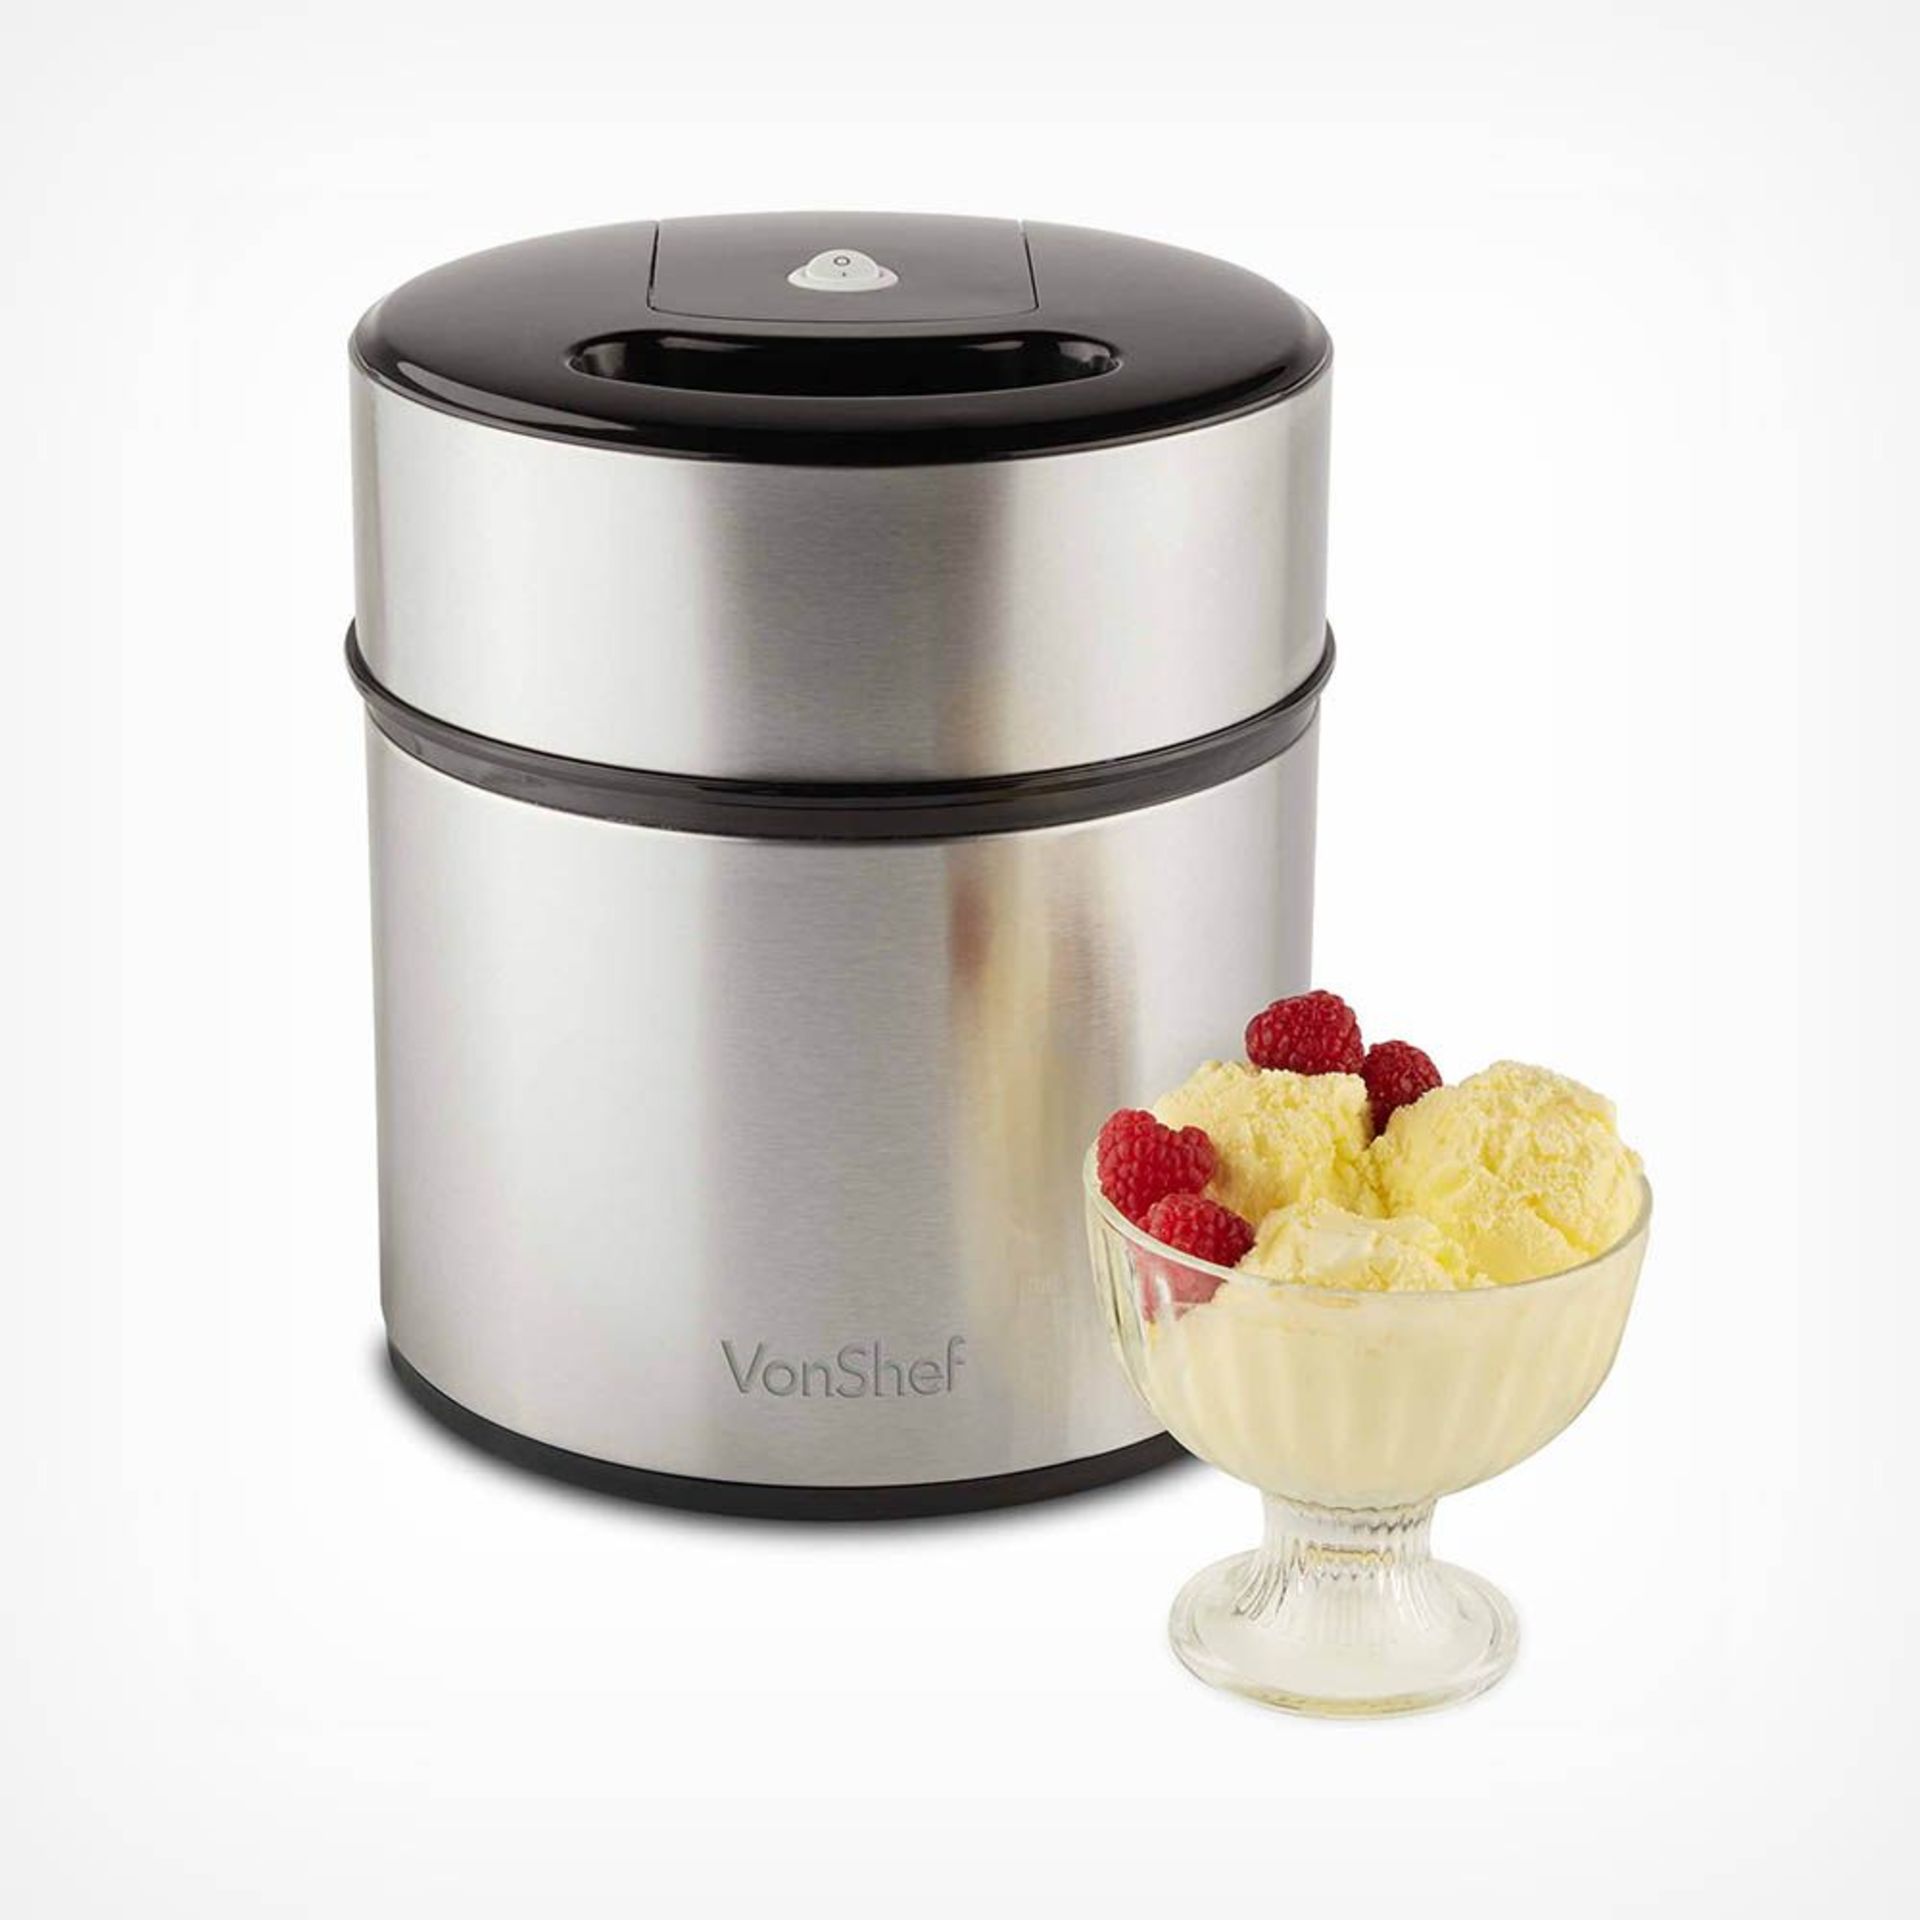 Stainless Steel Ice Cream Maker. Treat the whole family to some delicious homemade ice-cream with